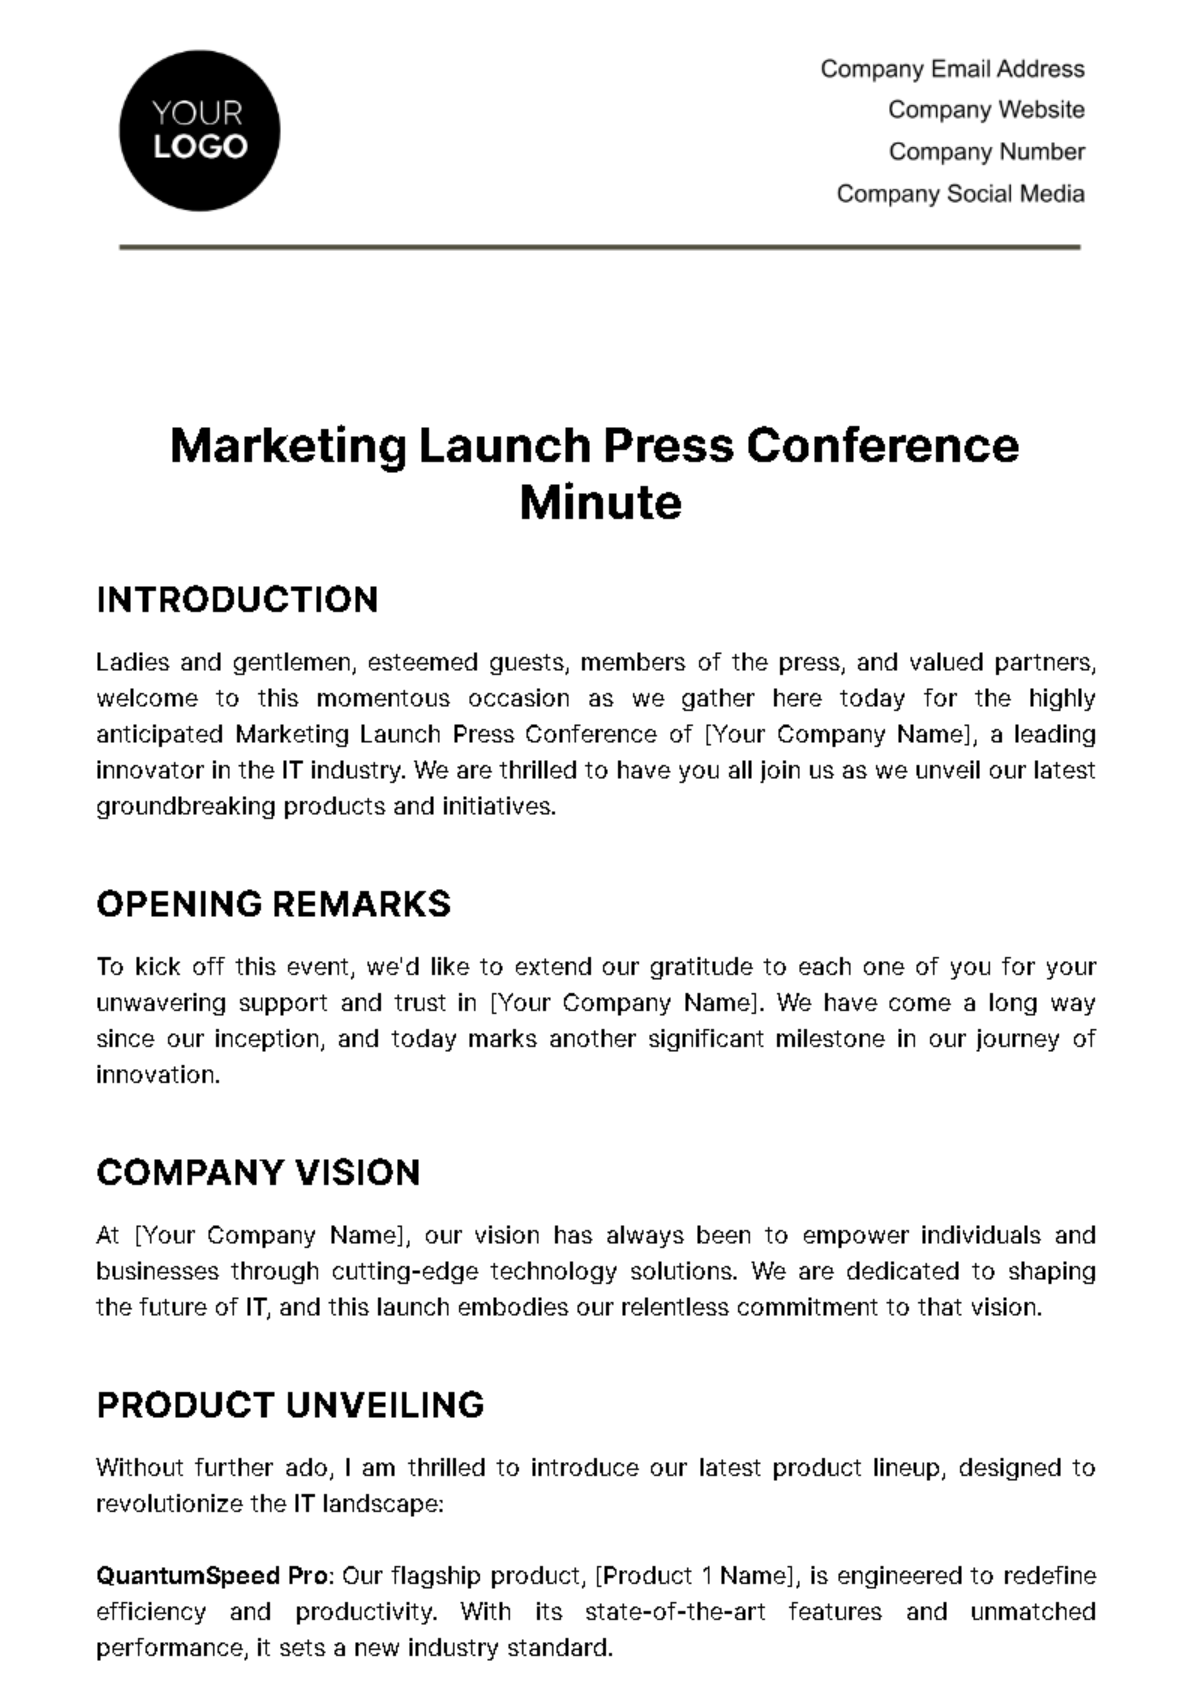 Marketing Launch Press Conference Minute Template